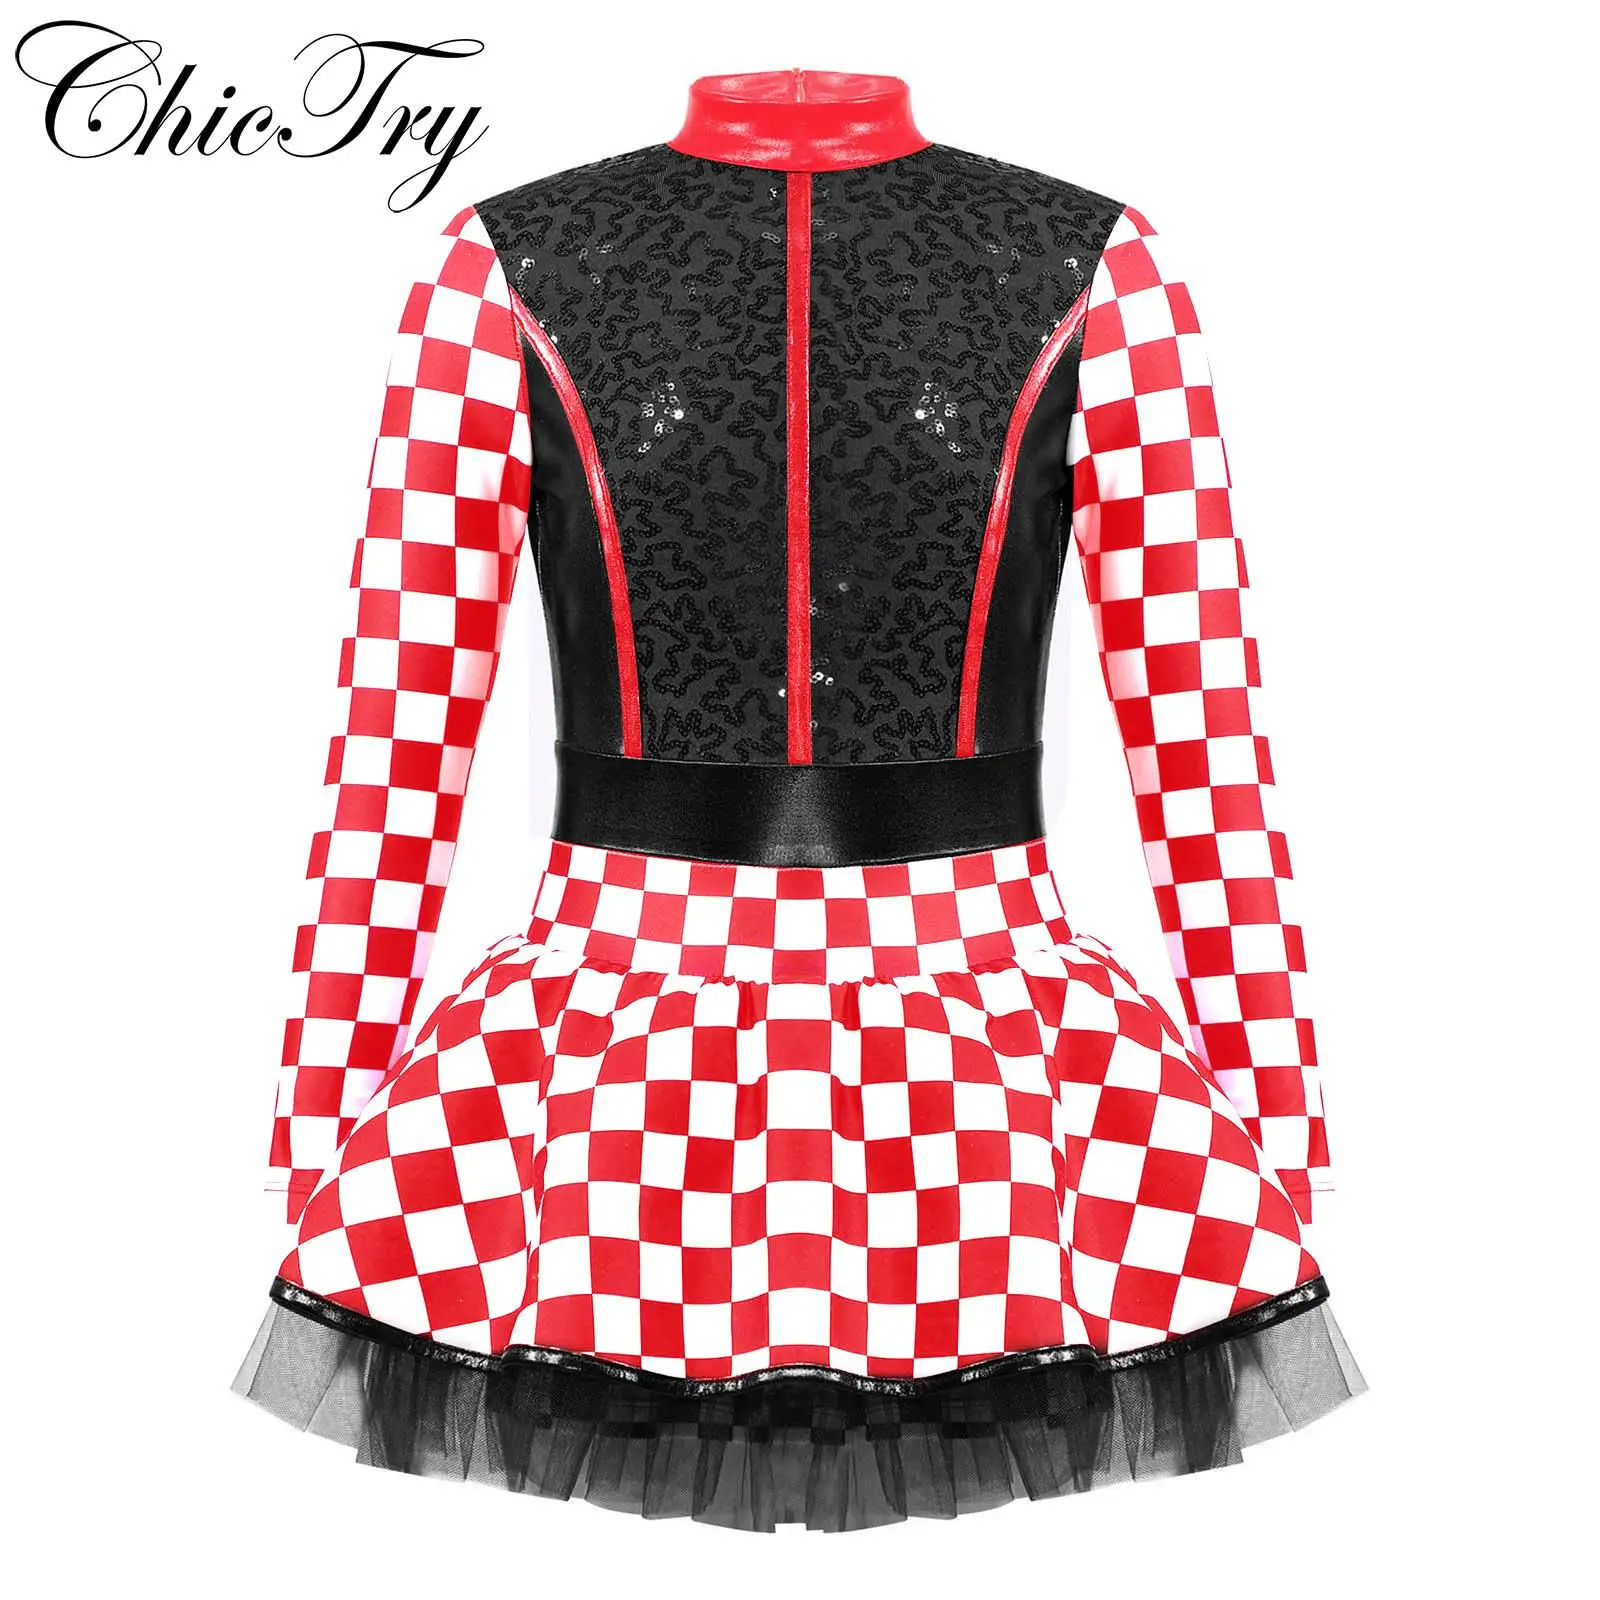 

Kids Girls Racer Racing Driver Costume Halloween Cosplay Party Leotard Dress Carnival Dress Up Cheerleading Roleplay Jumpsuit